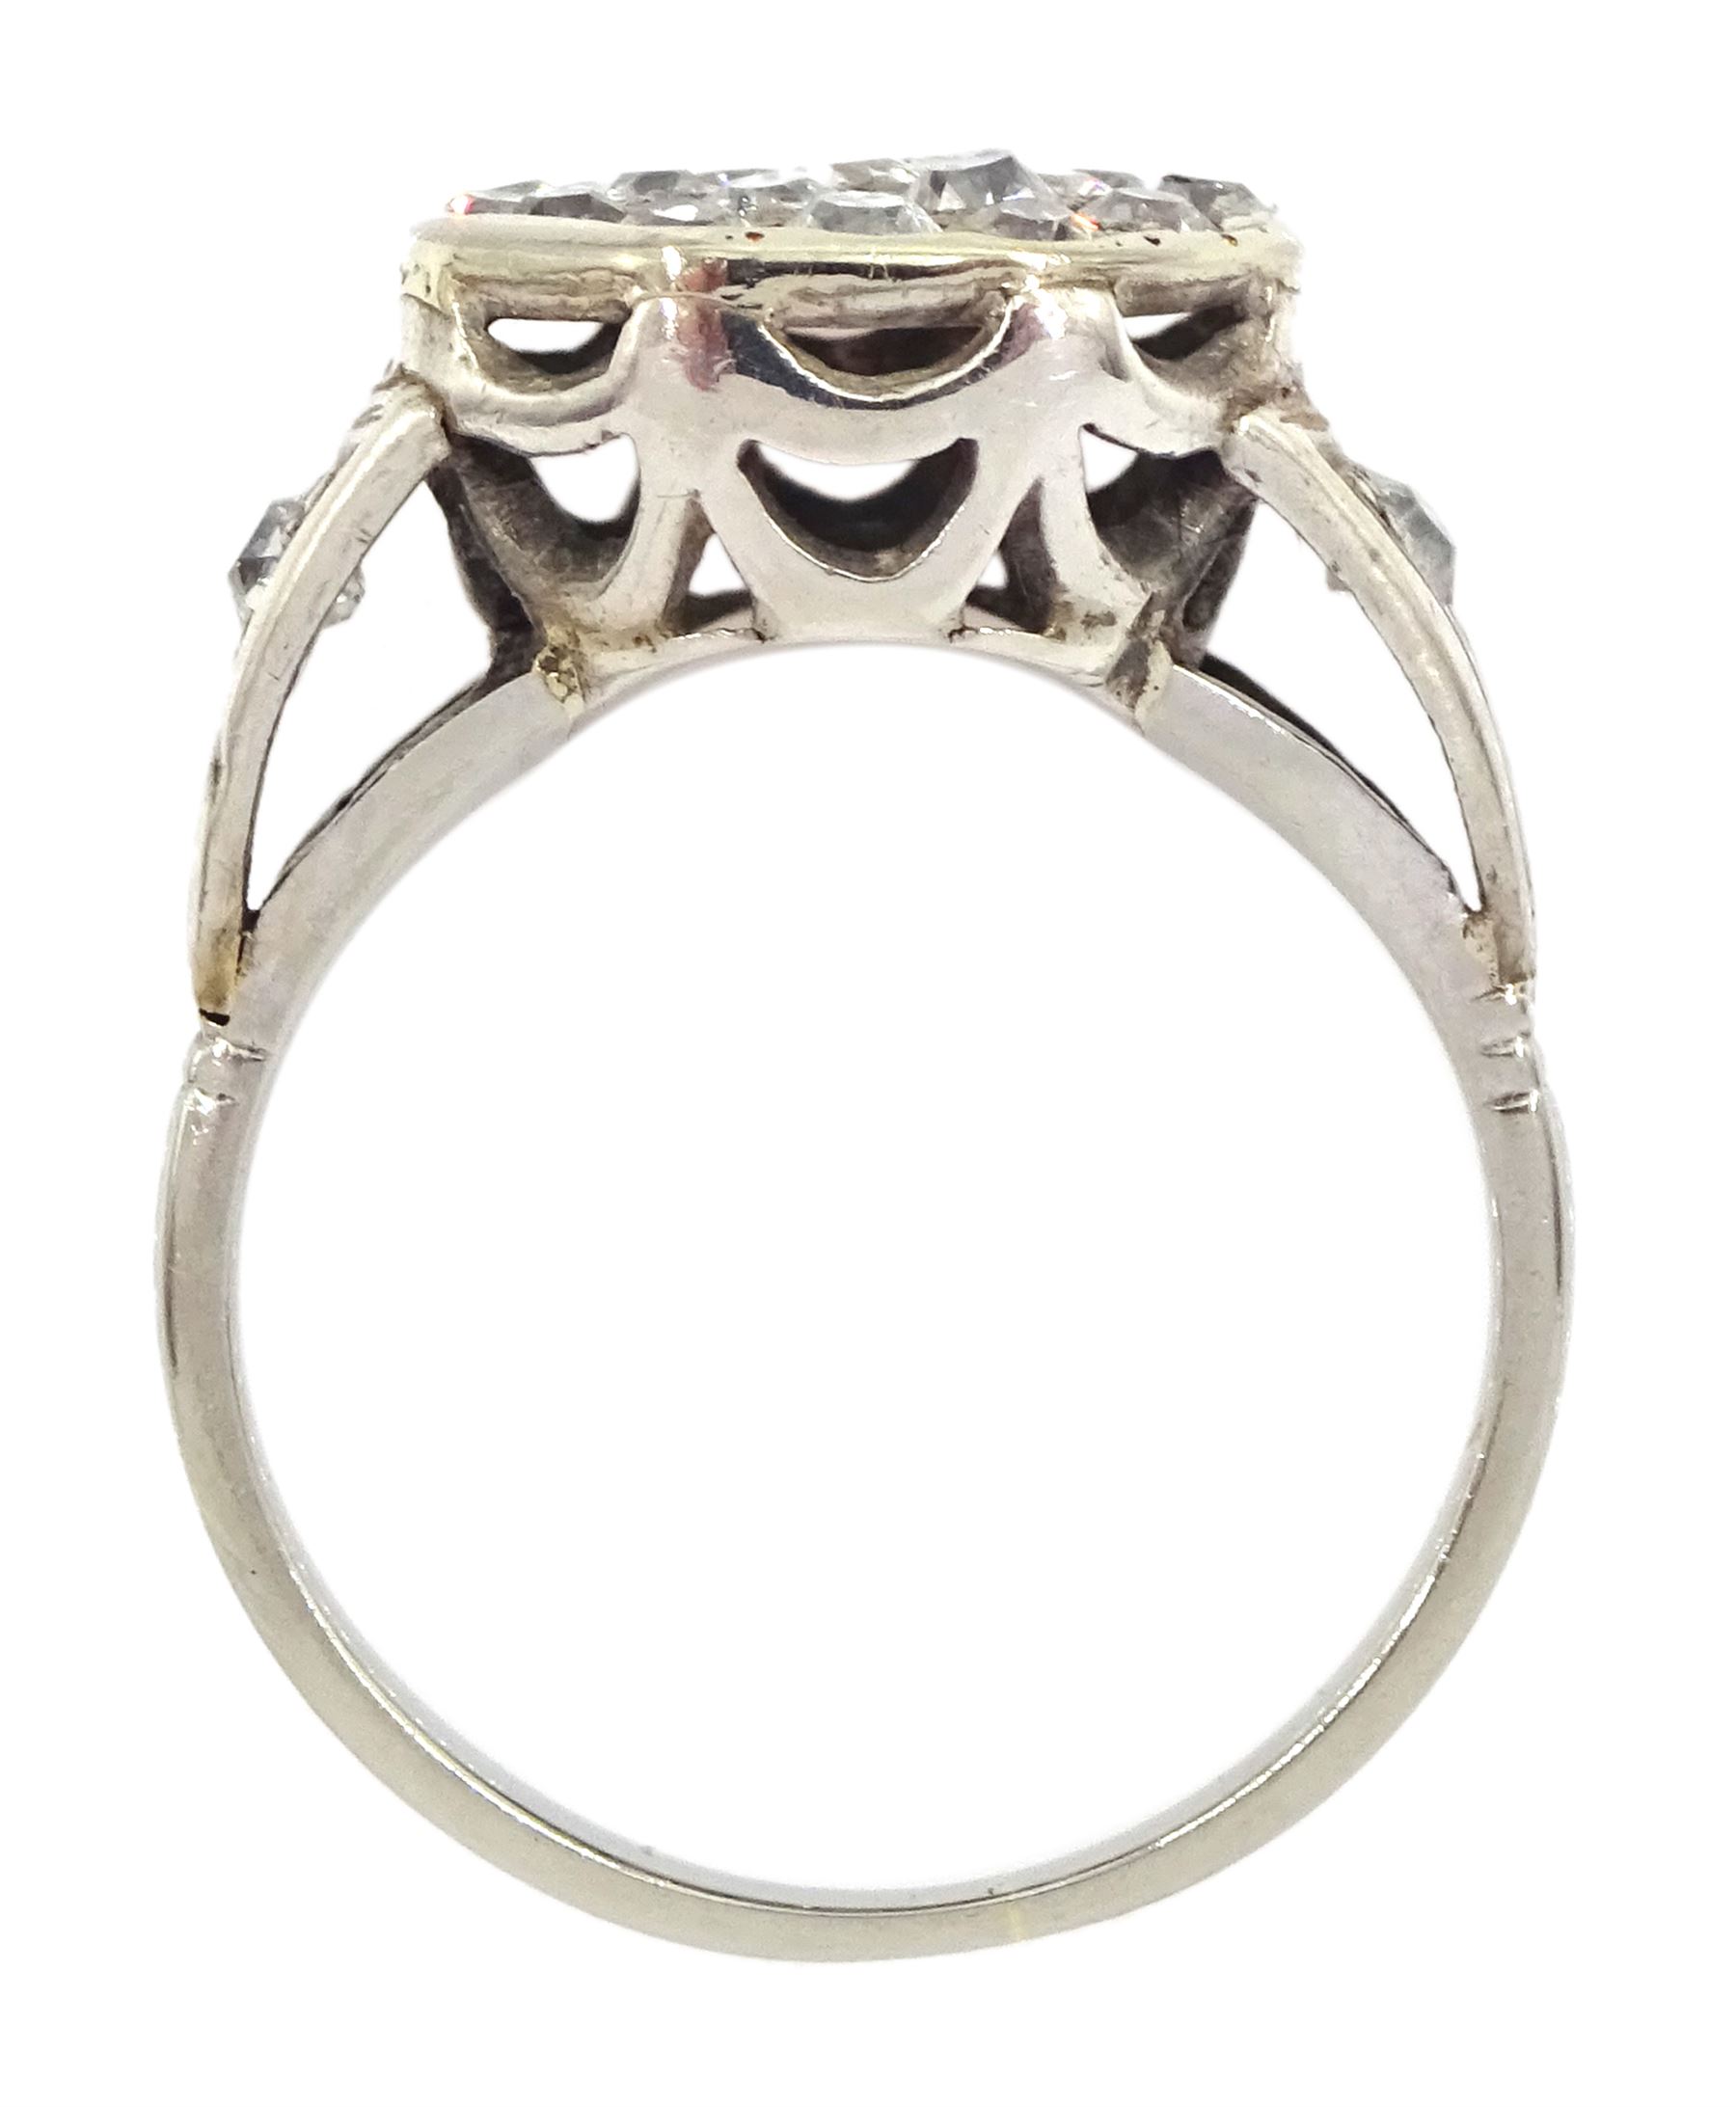 Early 20th century 18ct white gold and silver old cut diamond cluster ring - Image 4 of 4